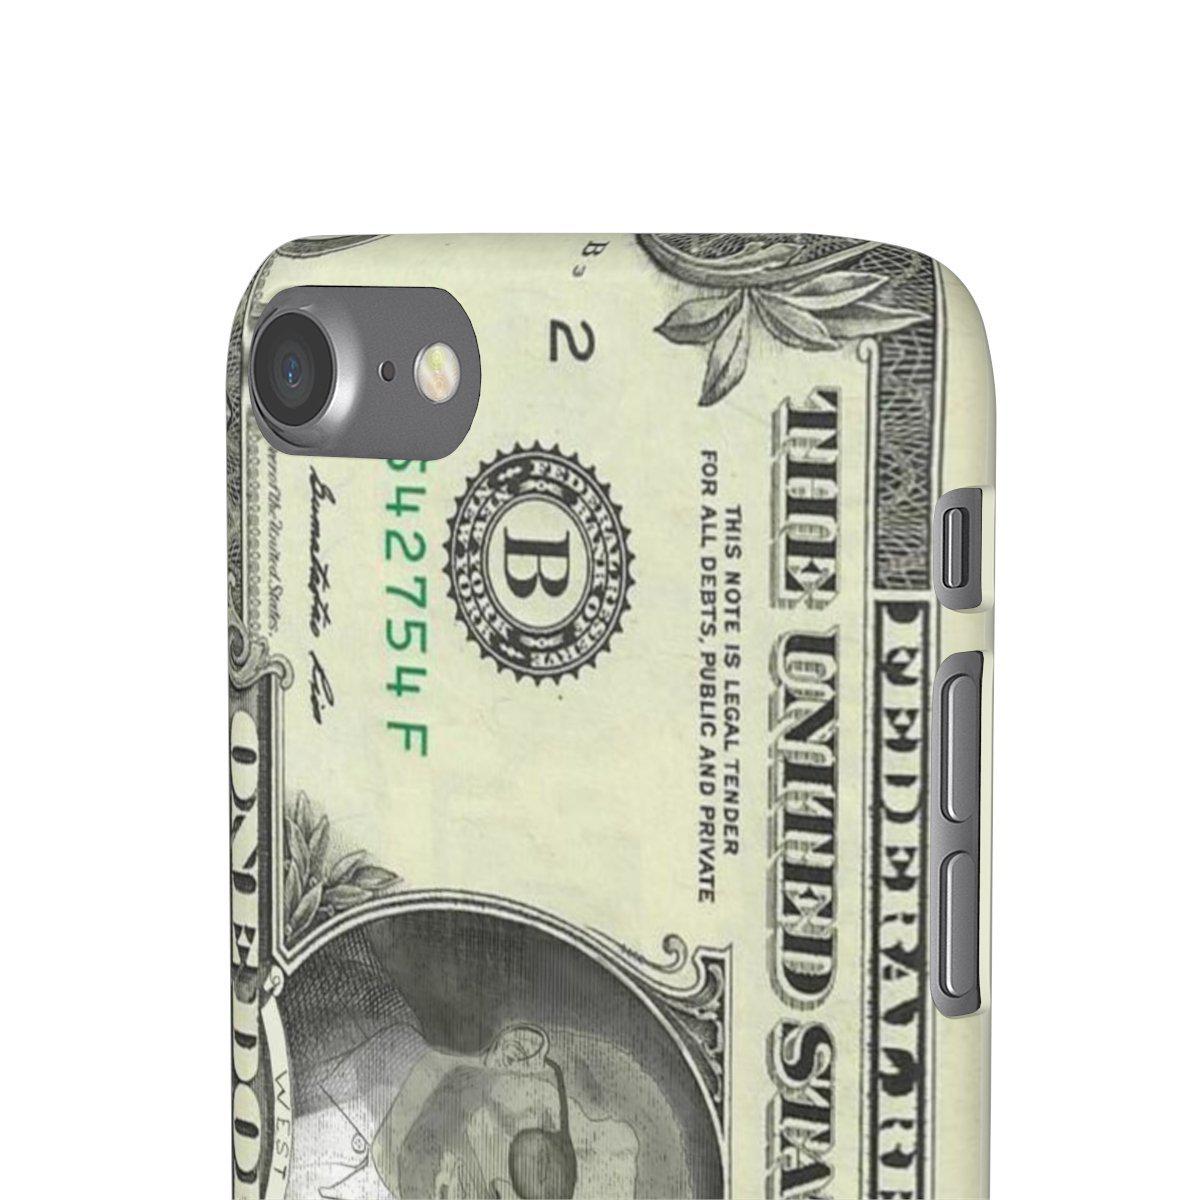 Kanye West President face on 1 dollar bill case iPhone Snap Case-iPhone 7-Glossy-Archethype